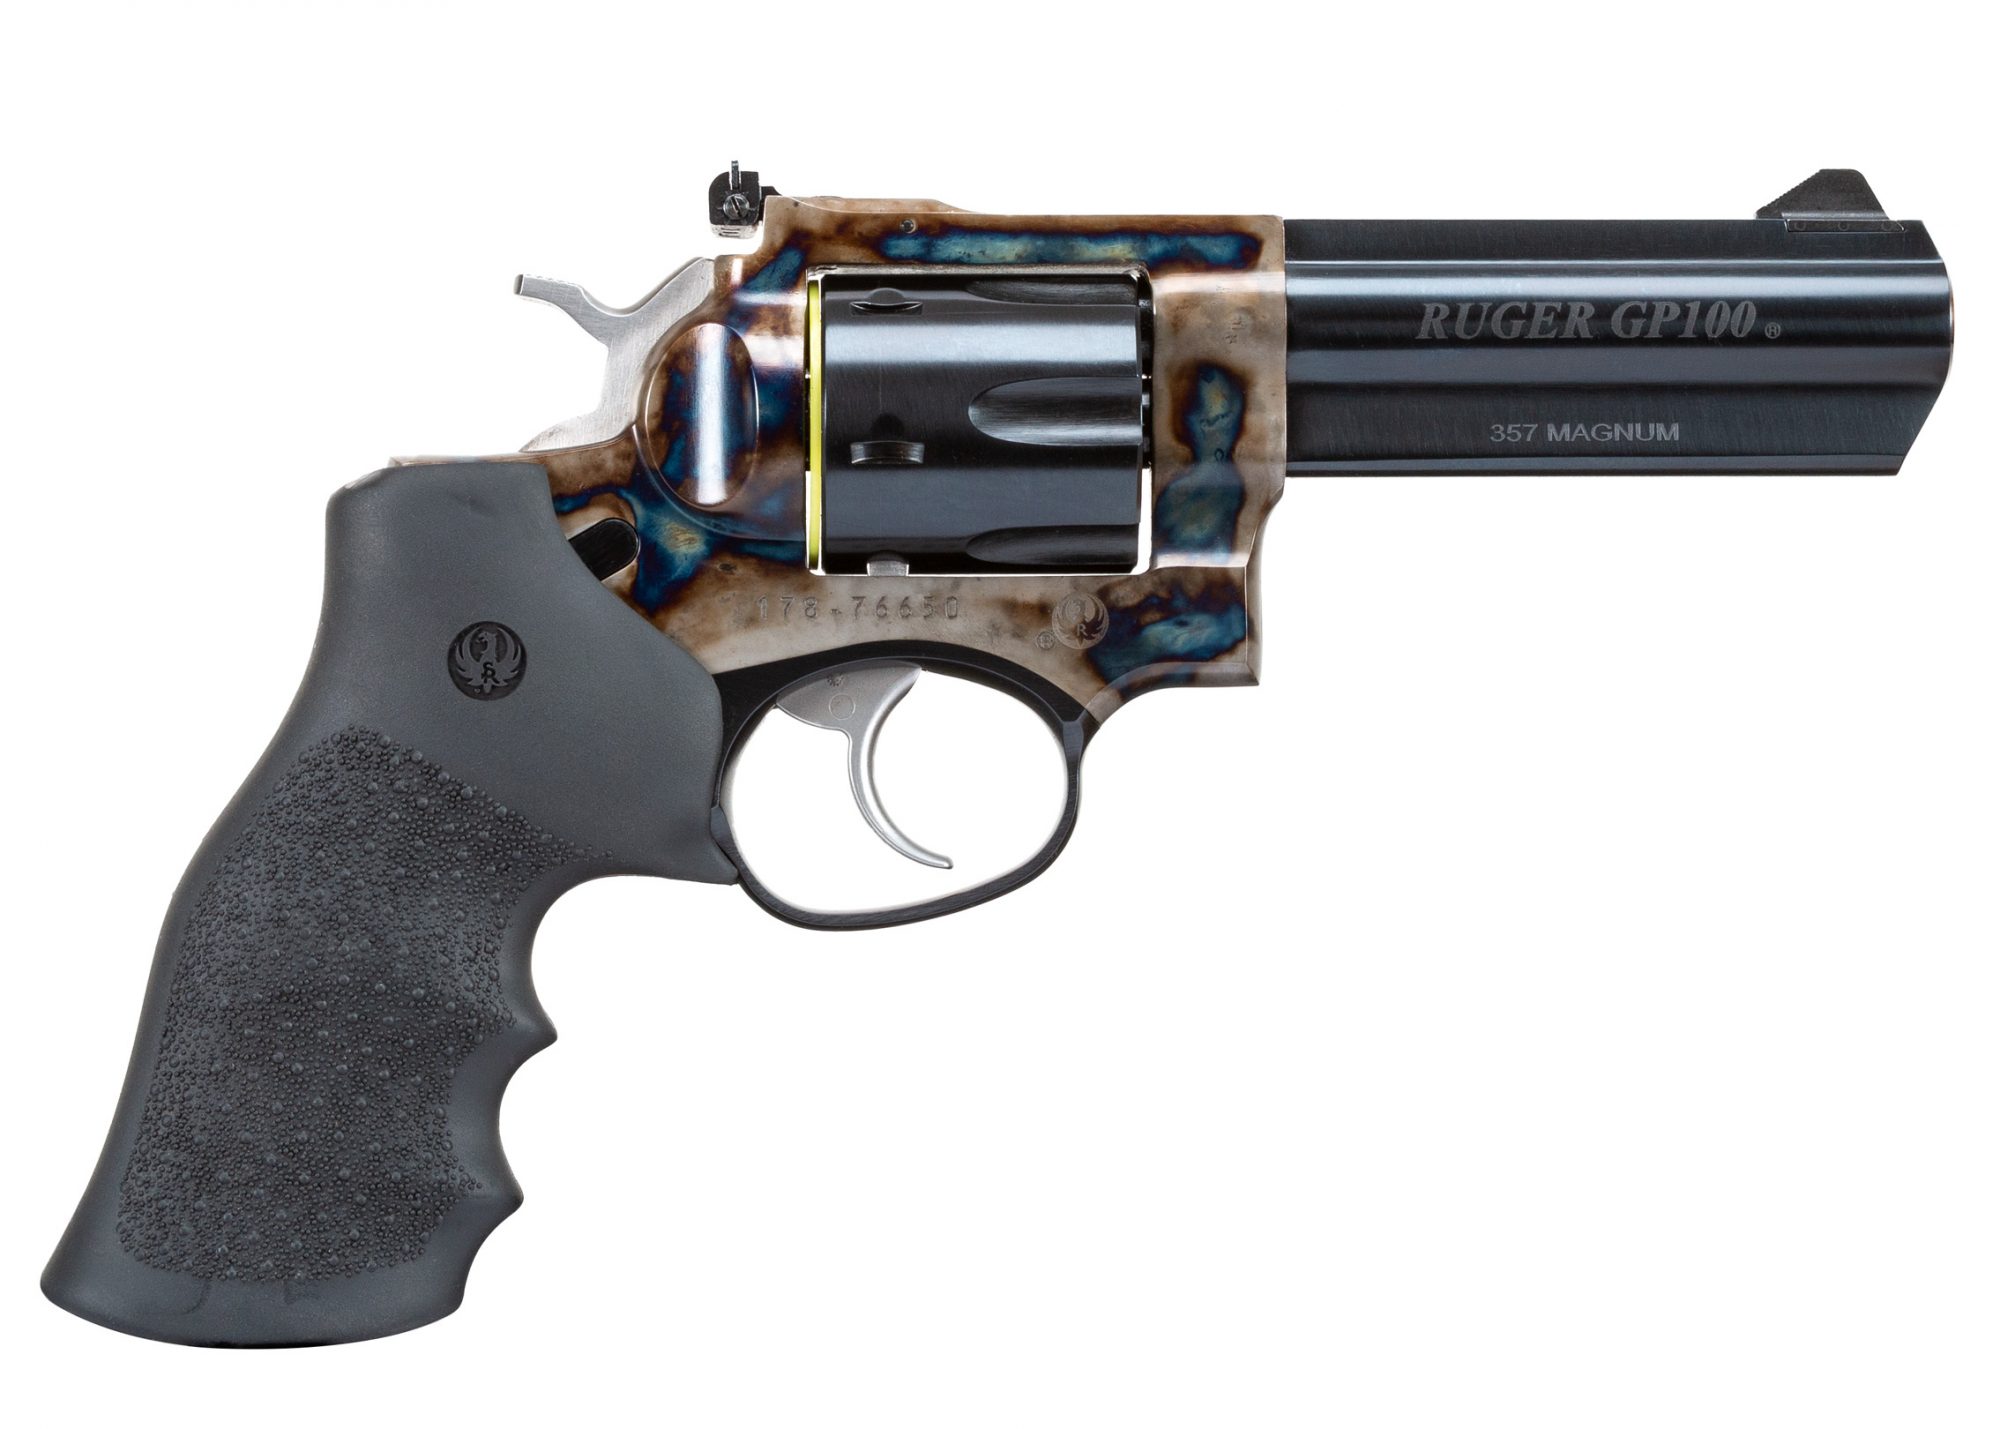 Turnbull Finished Ruger GP100